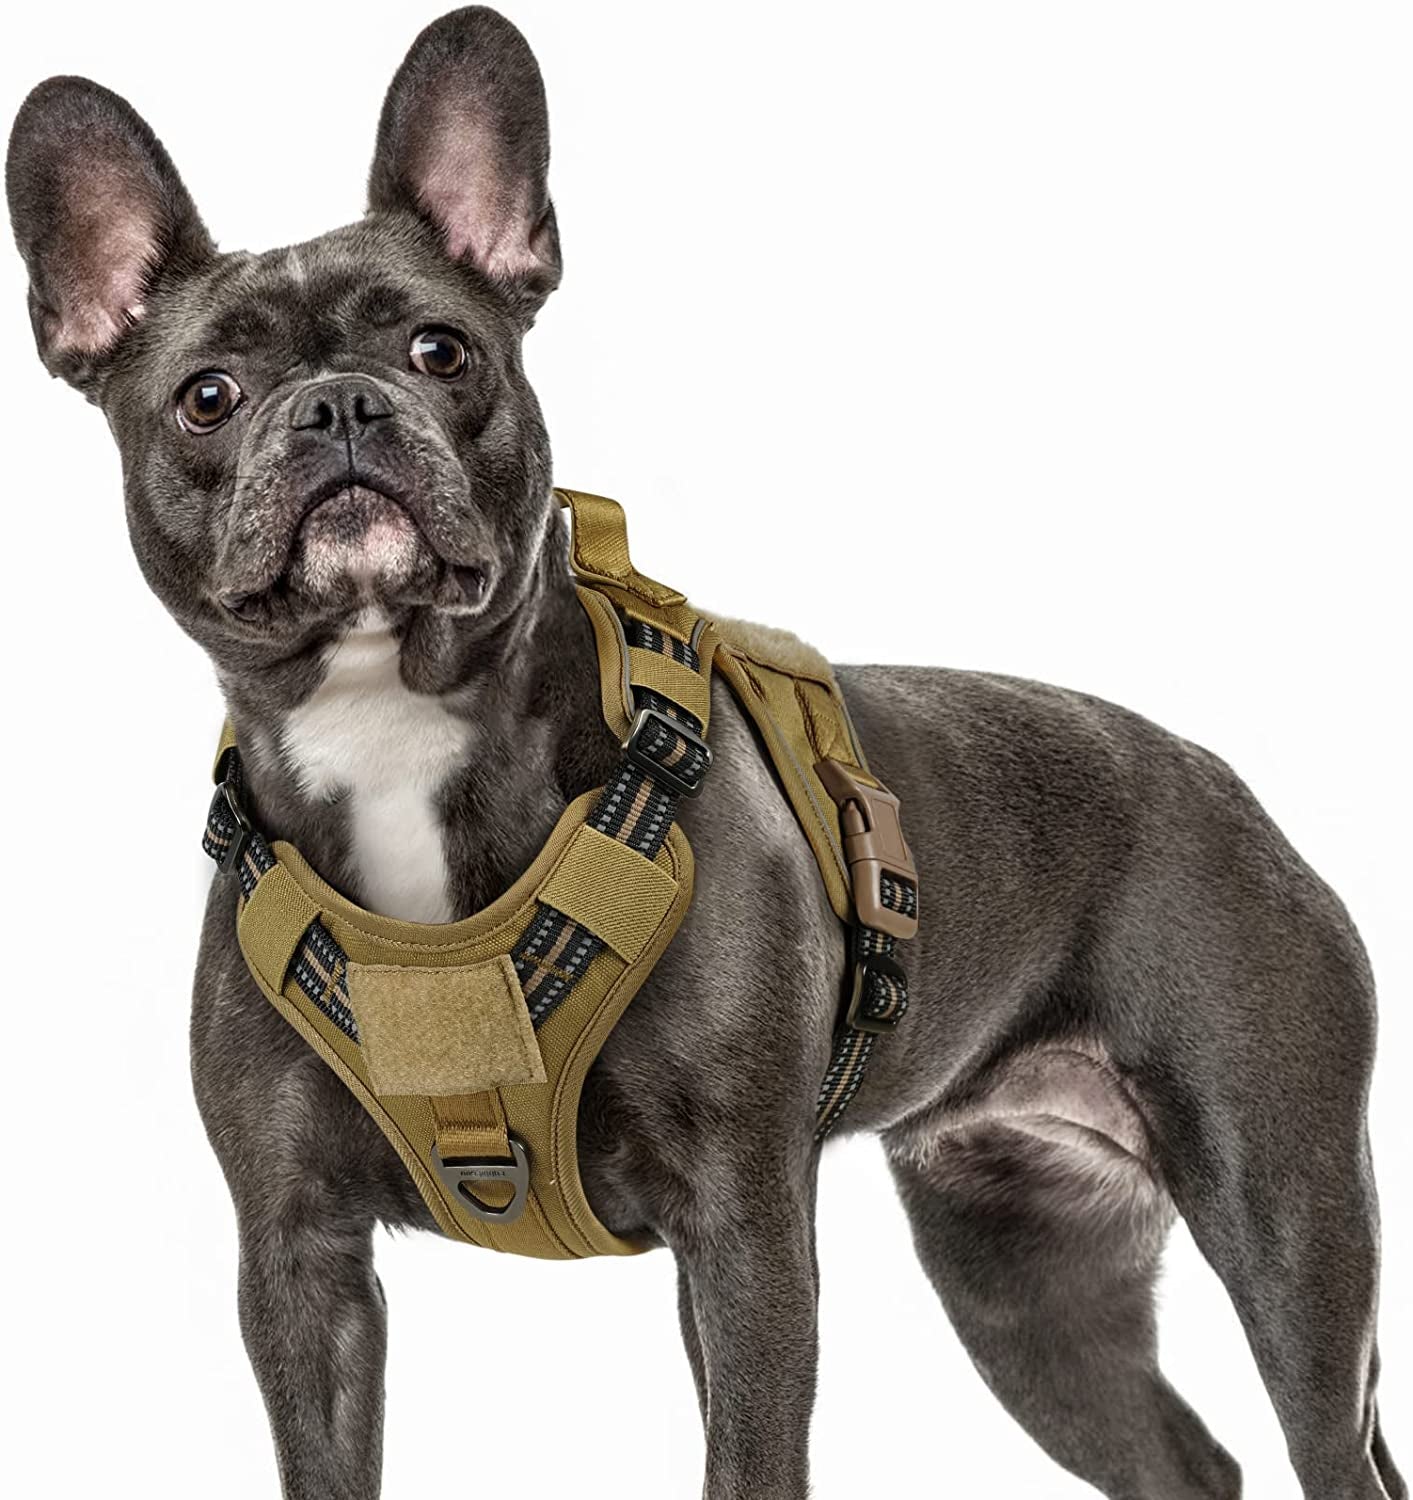 Rabbitgoo Tactical Dog Harness No Pull, Military Dog Vest Harness with Handle & Molle, Easy Control Service Dog Harness for Large Dogs Training Walking, Adjustable Reflective Pet Harness, Black, L Animals & Pet Supplies > Pet Supplies > Dog Supplies > Dog Apparel GLOBEGOU CO.,LTD Brown Medium 